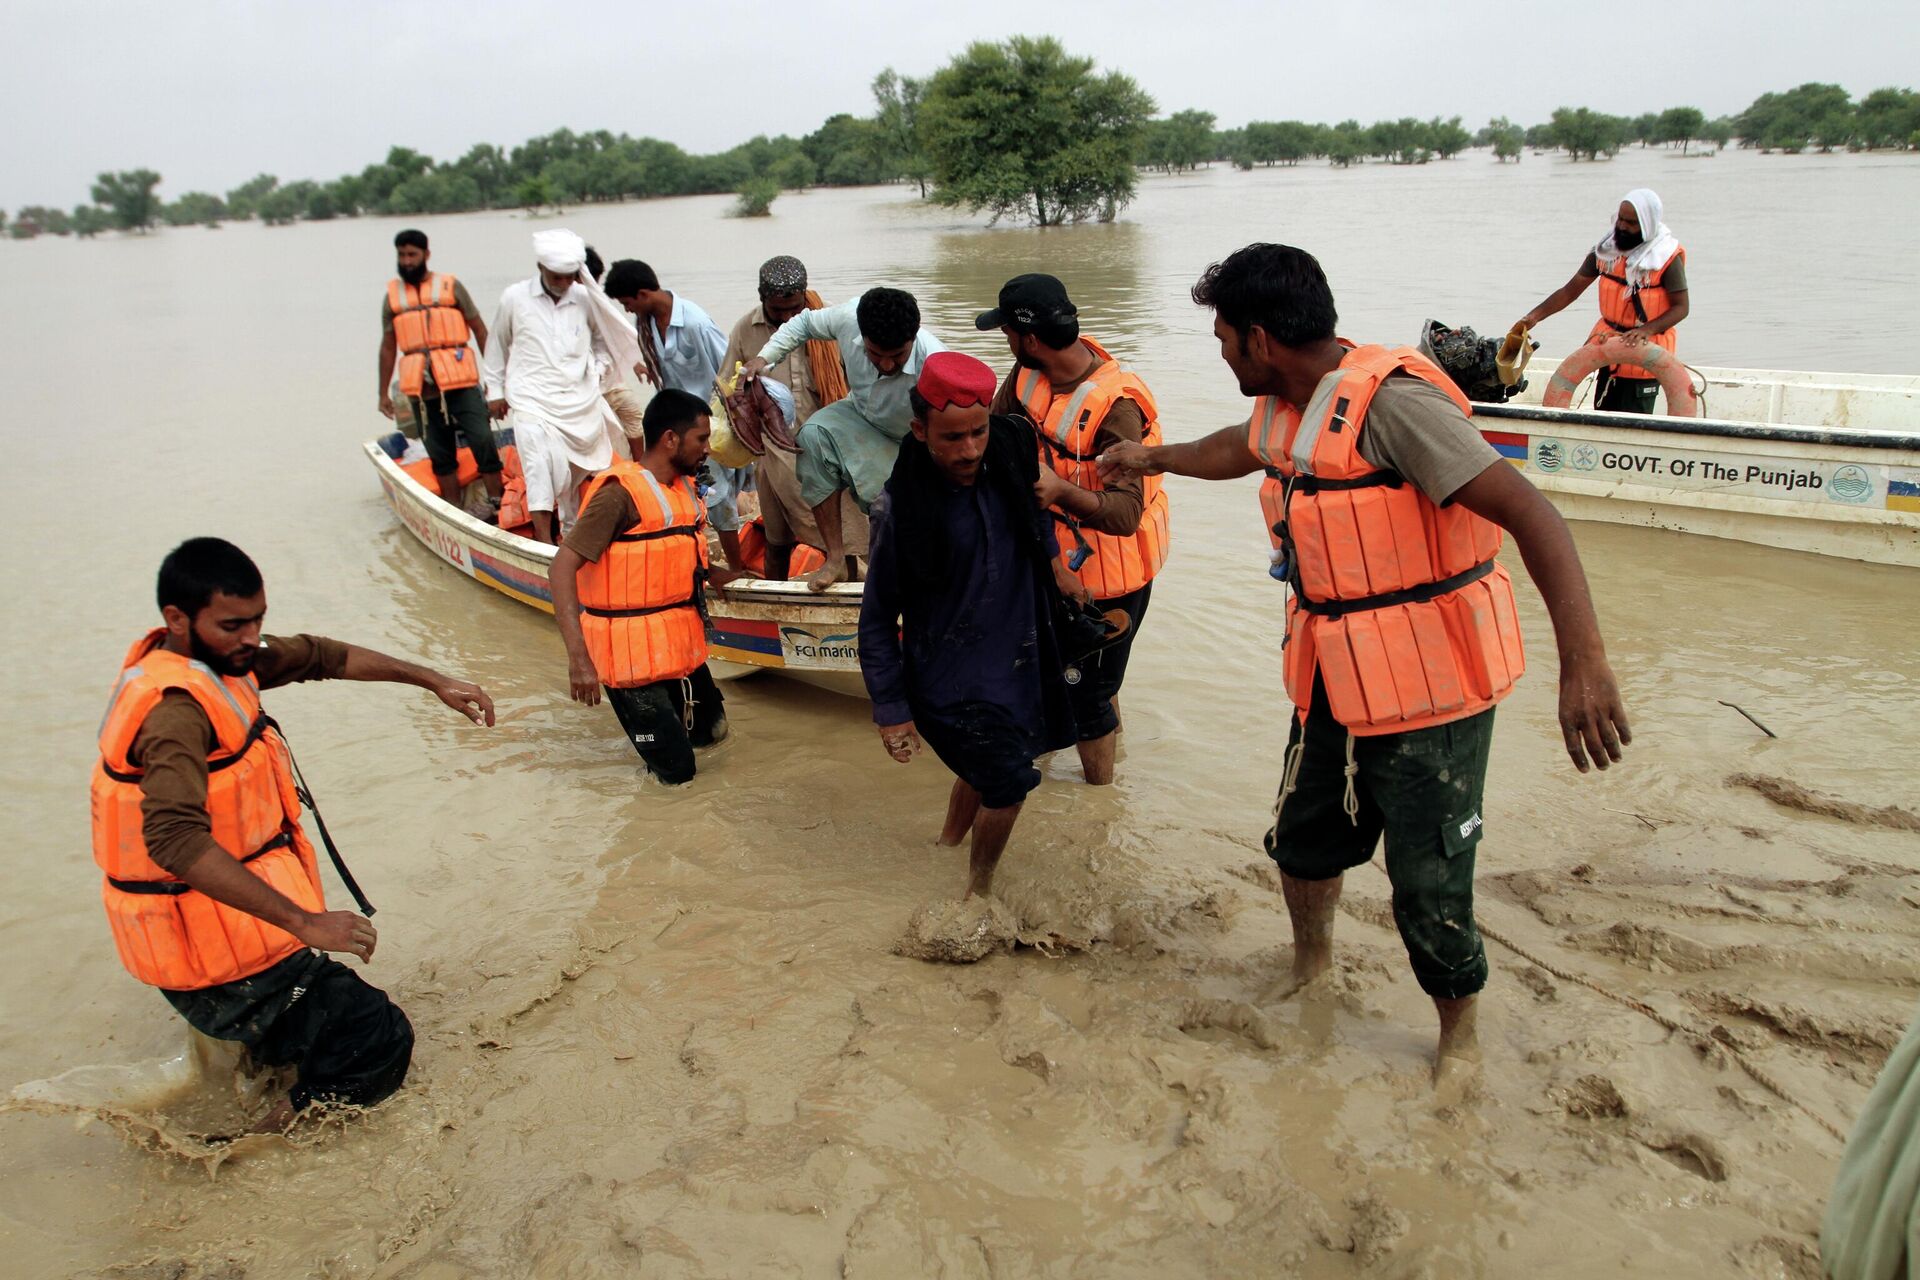 Army troops evacuate people from a flood-hit area in Rajanpur, district of Punjab, Pakistan, Saturday, Aug. 27, 2022. Officials say flash floods triggered by heavy monsoon rains across much of Pakistan have killed nearly 1,000 people and displaced thousands more since mid-June. (AP Photo/Asim Tanveer) - Sputnik International, 1920, 03.09.2022